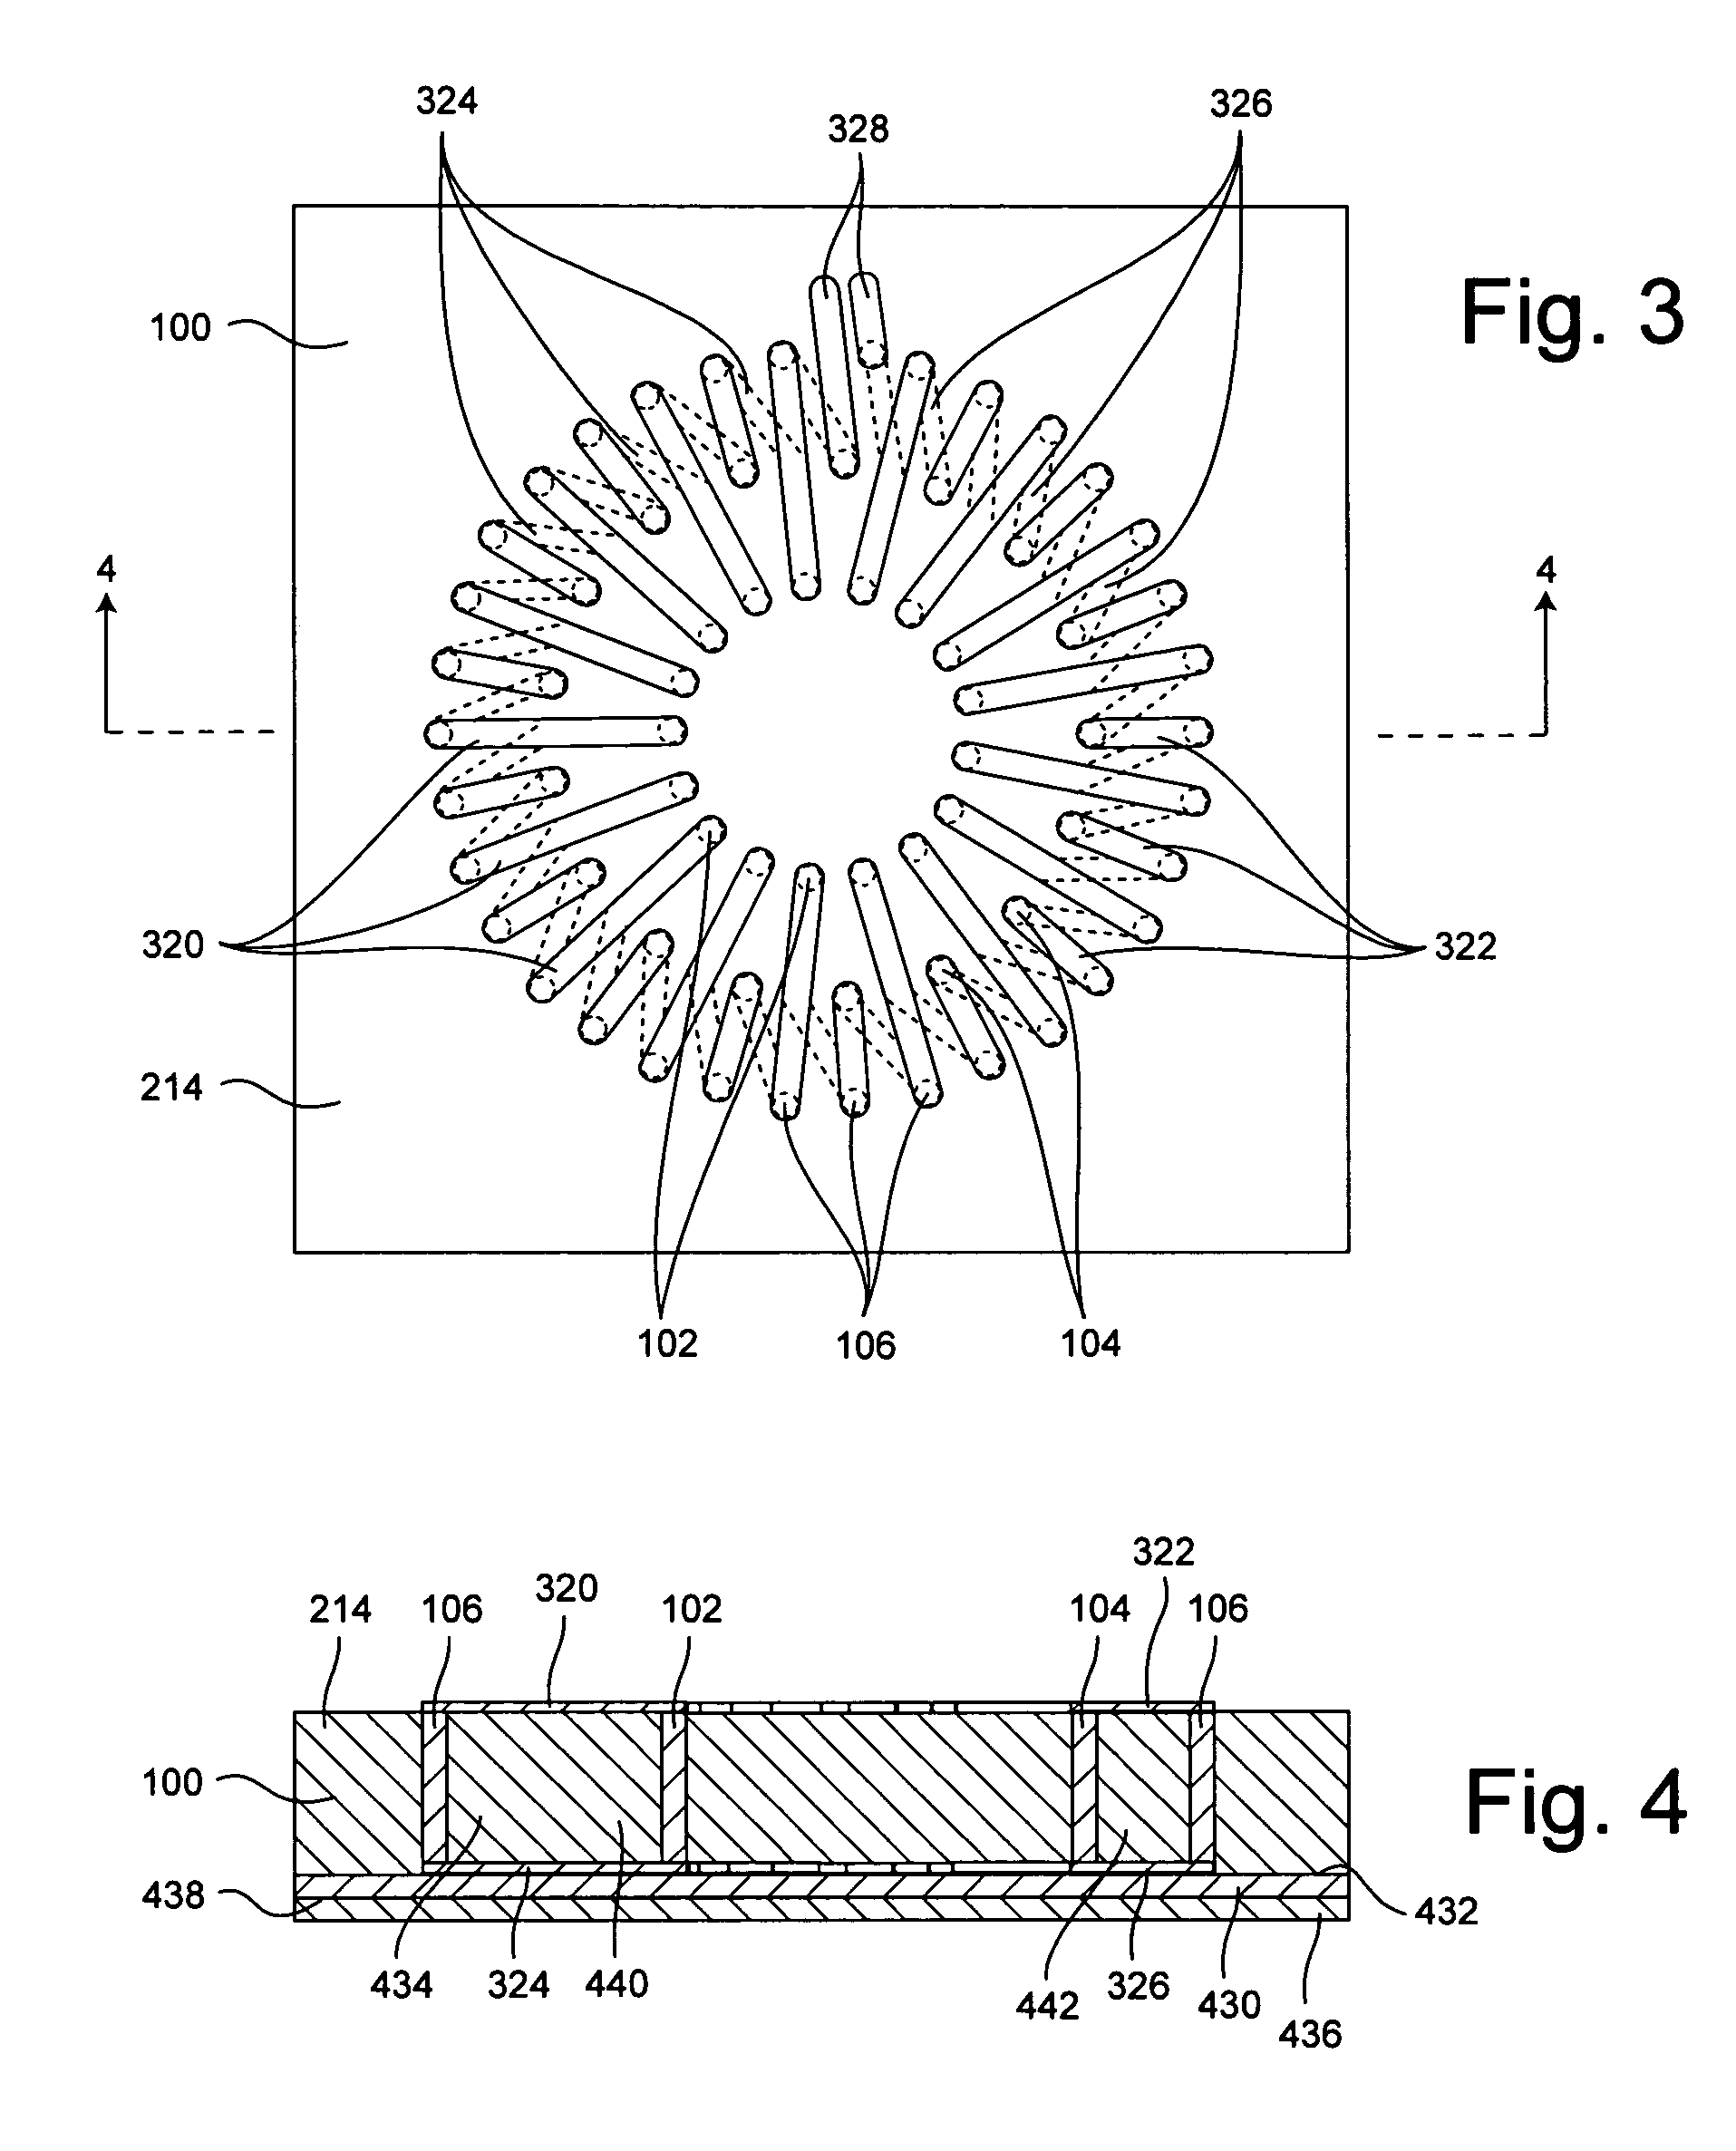 Embedded toroidal inductor